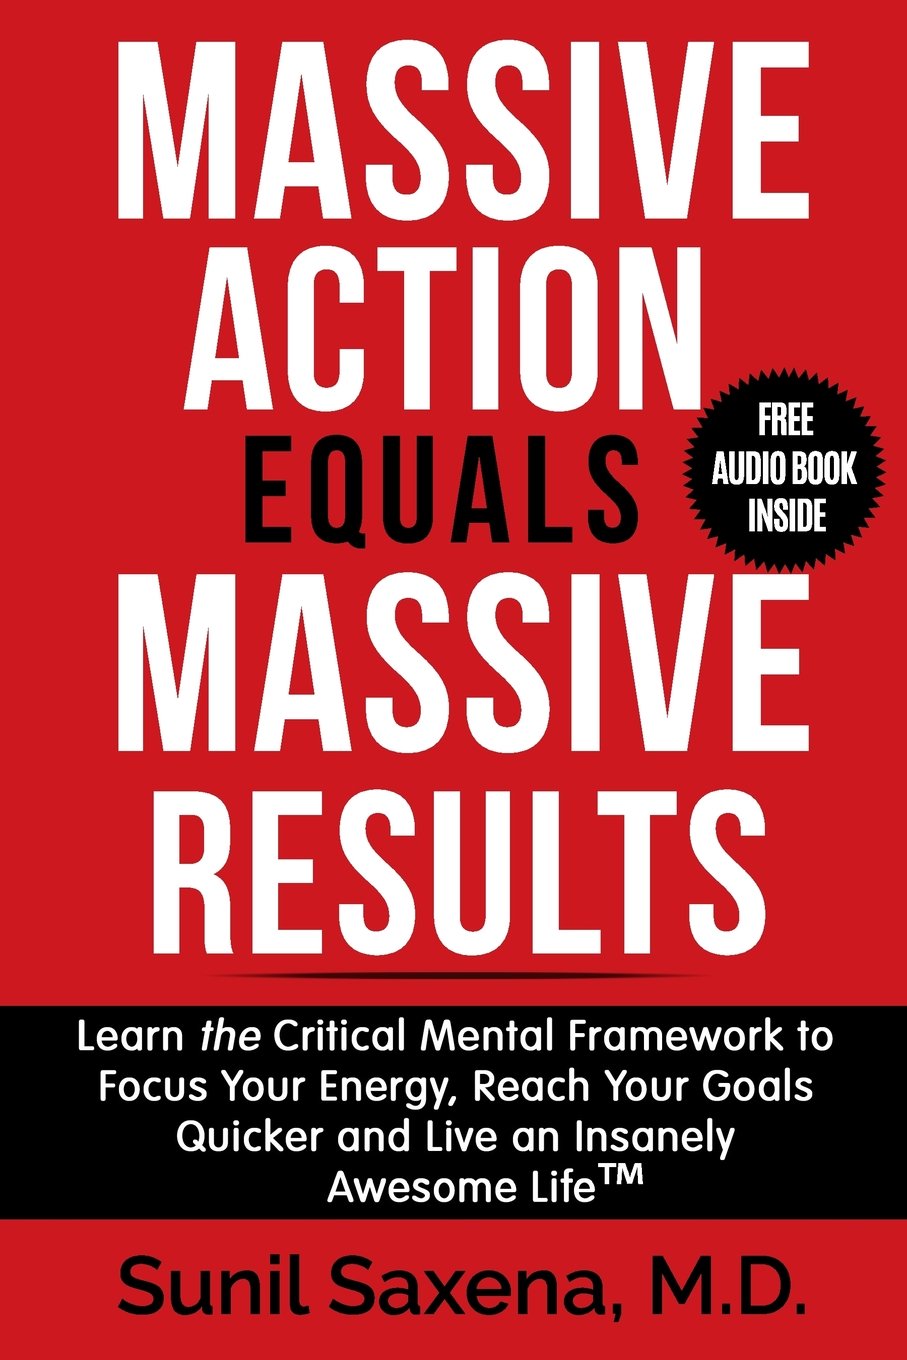 Massive Action Equal Massive Results: Learn the Critical Mental Framework to Focus Your Energy, Reach Your Goals Quicker and Live an Insanely Awesome Life